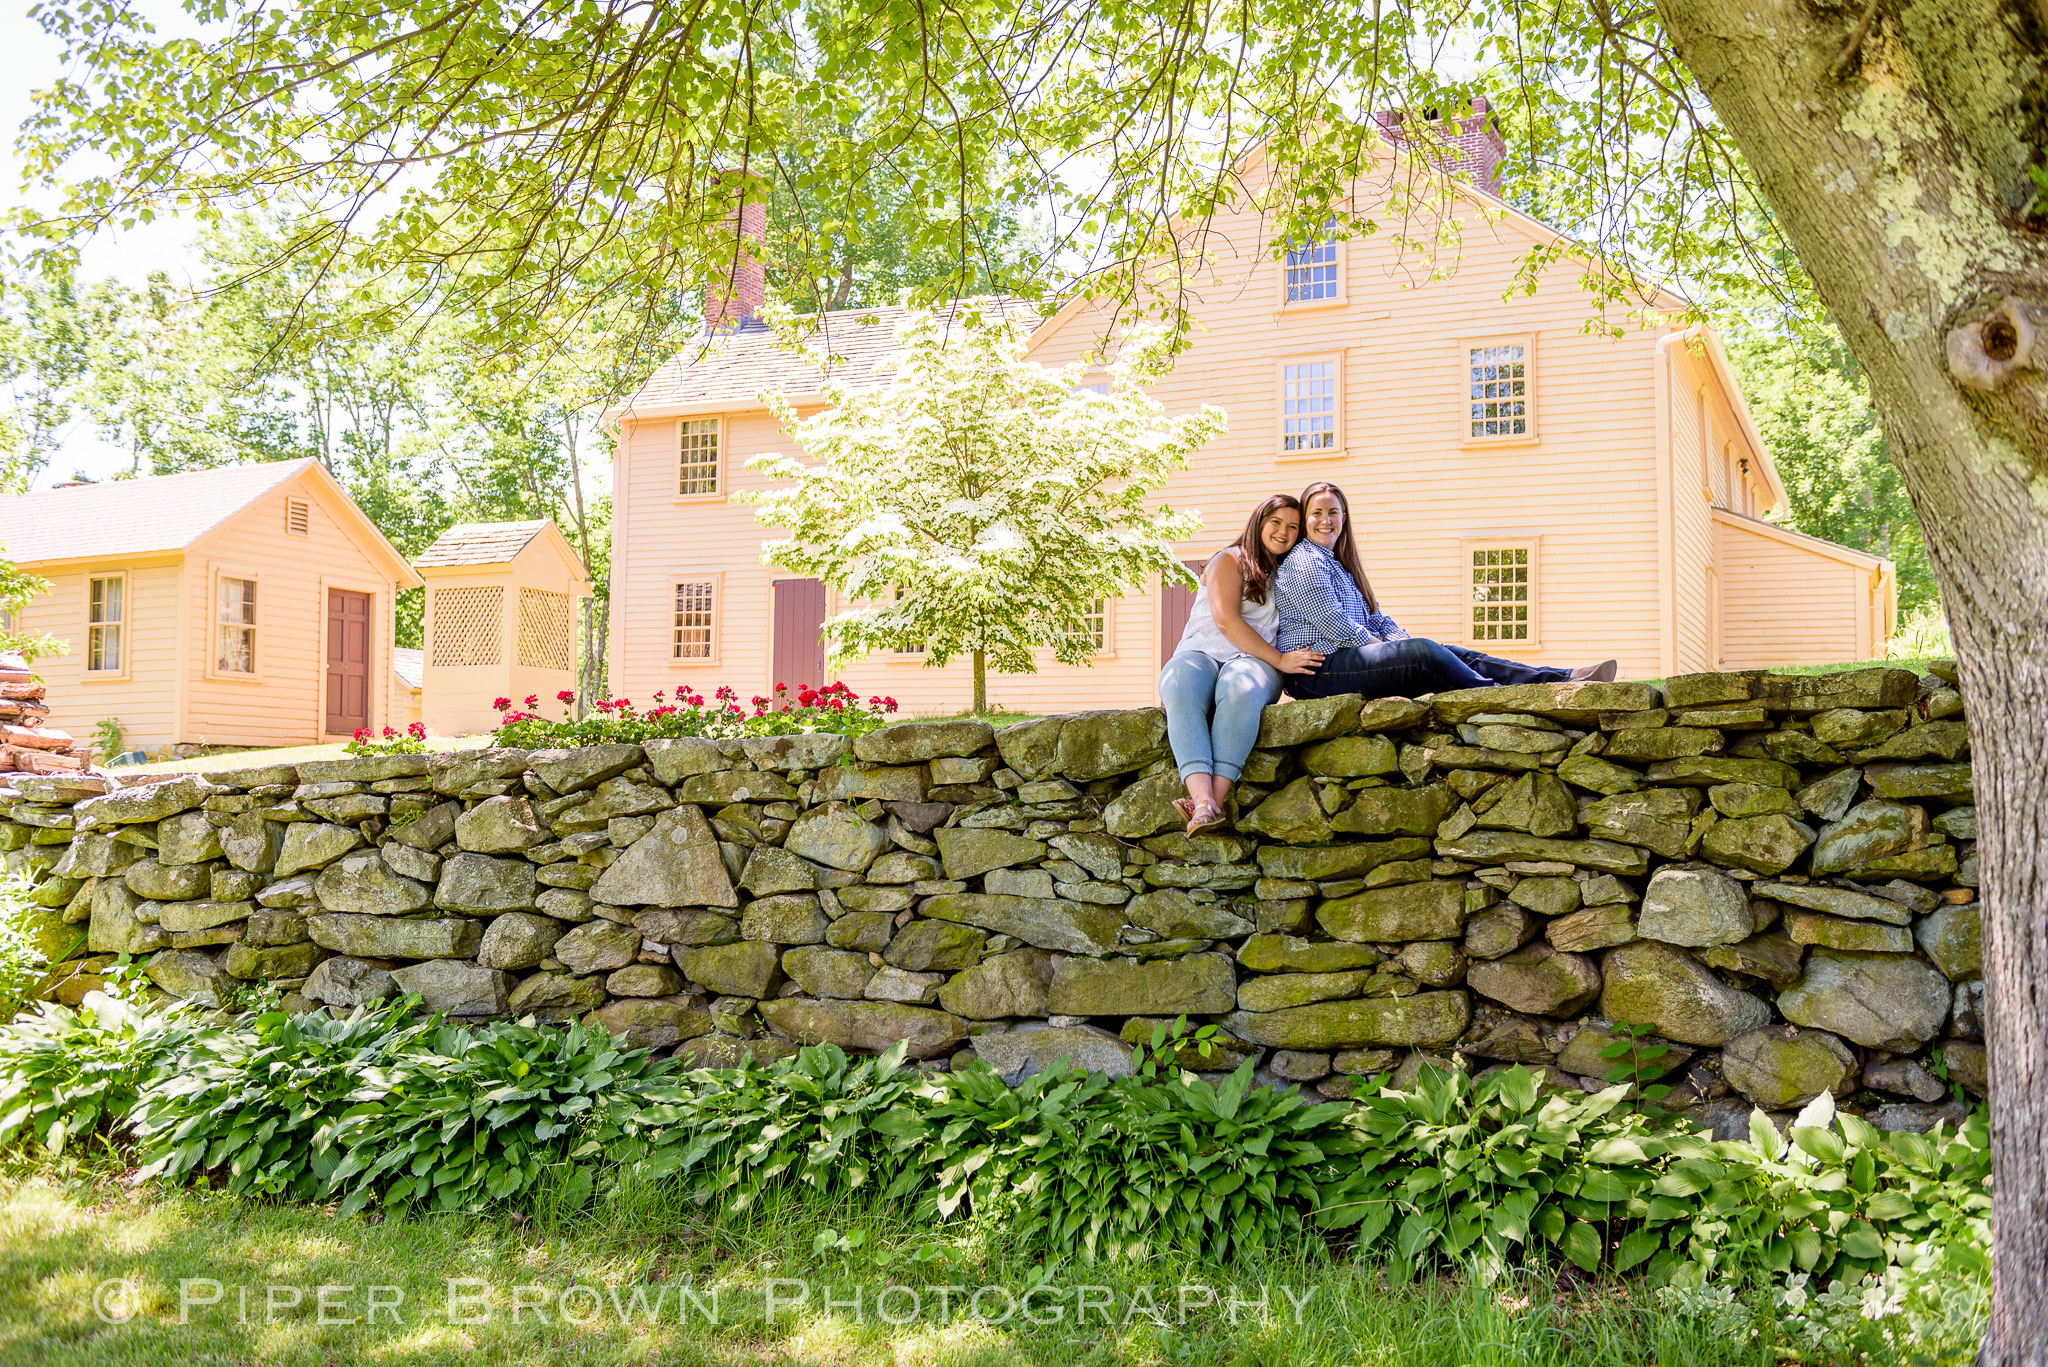 20190615-Smith Appleby House Engagement SessionMegan and Erin91.jpg